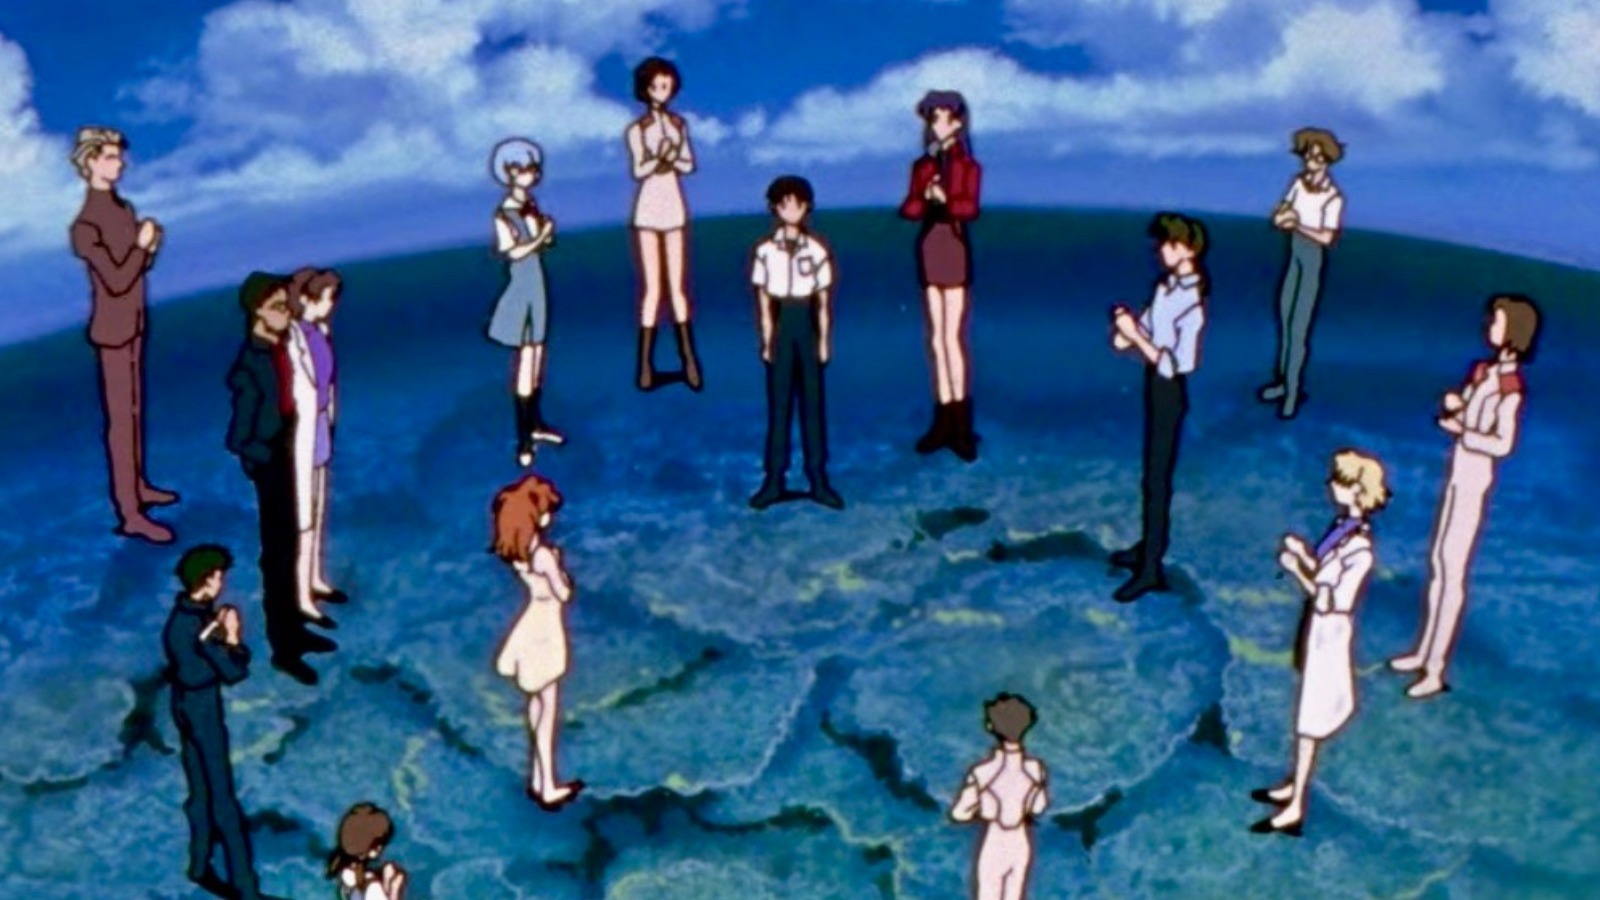 the ending of neon genesis evangelion is perfect and here’s why ...